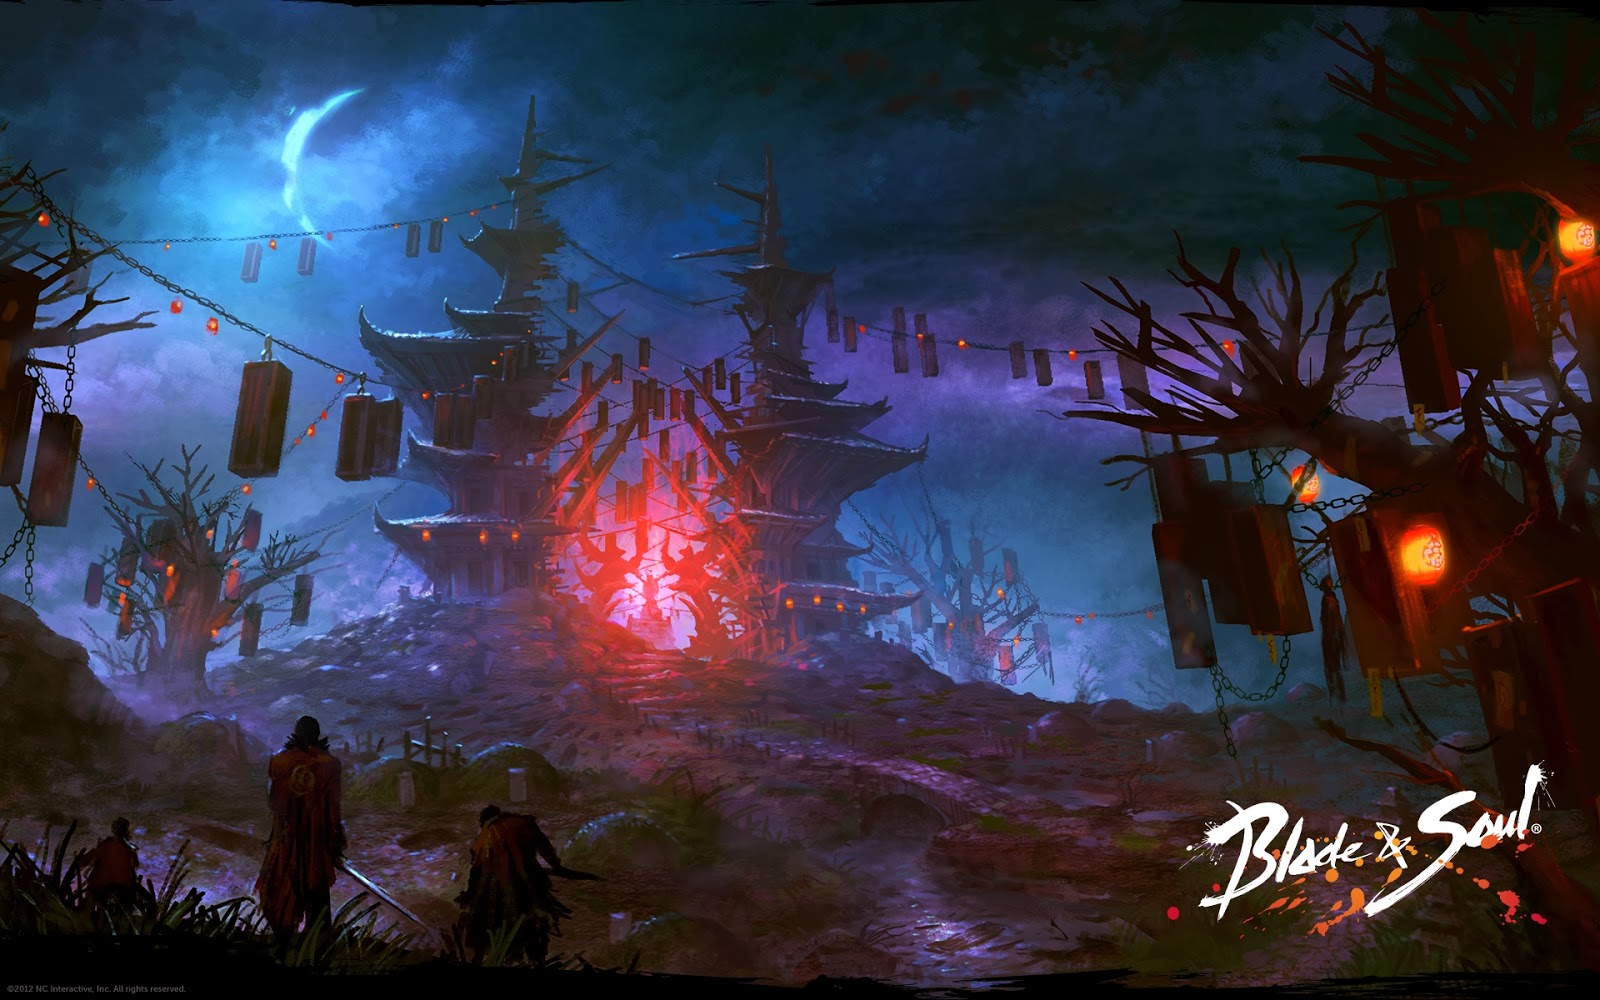 You are currently viewing Blade and Soul Wallpaper Download this